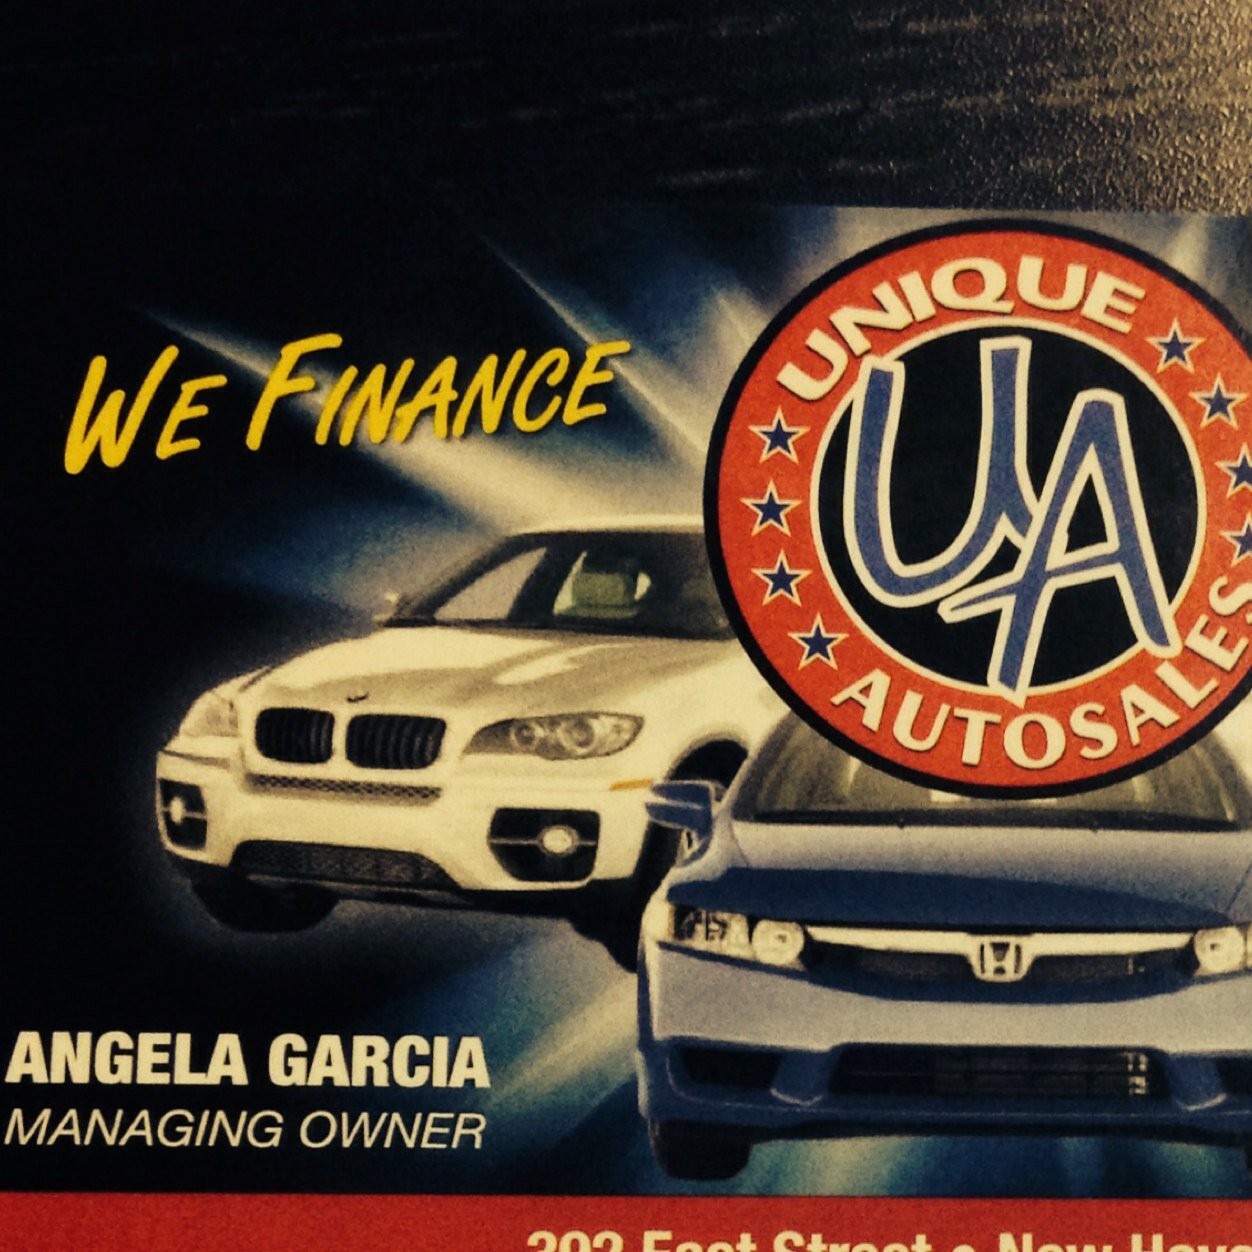 Unique autosales the best place and the best price to buy a car for more info call: 203-824-5155. Or come down and take a look for your self.